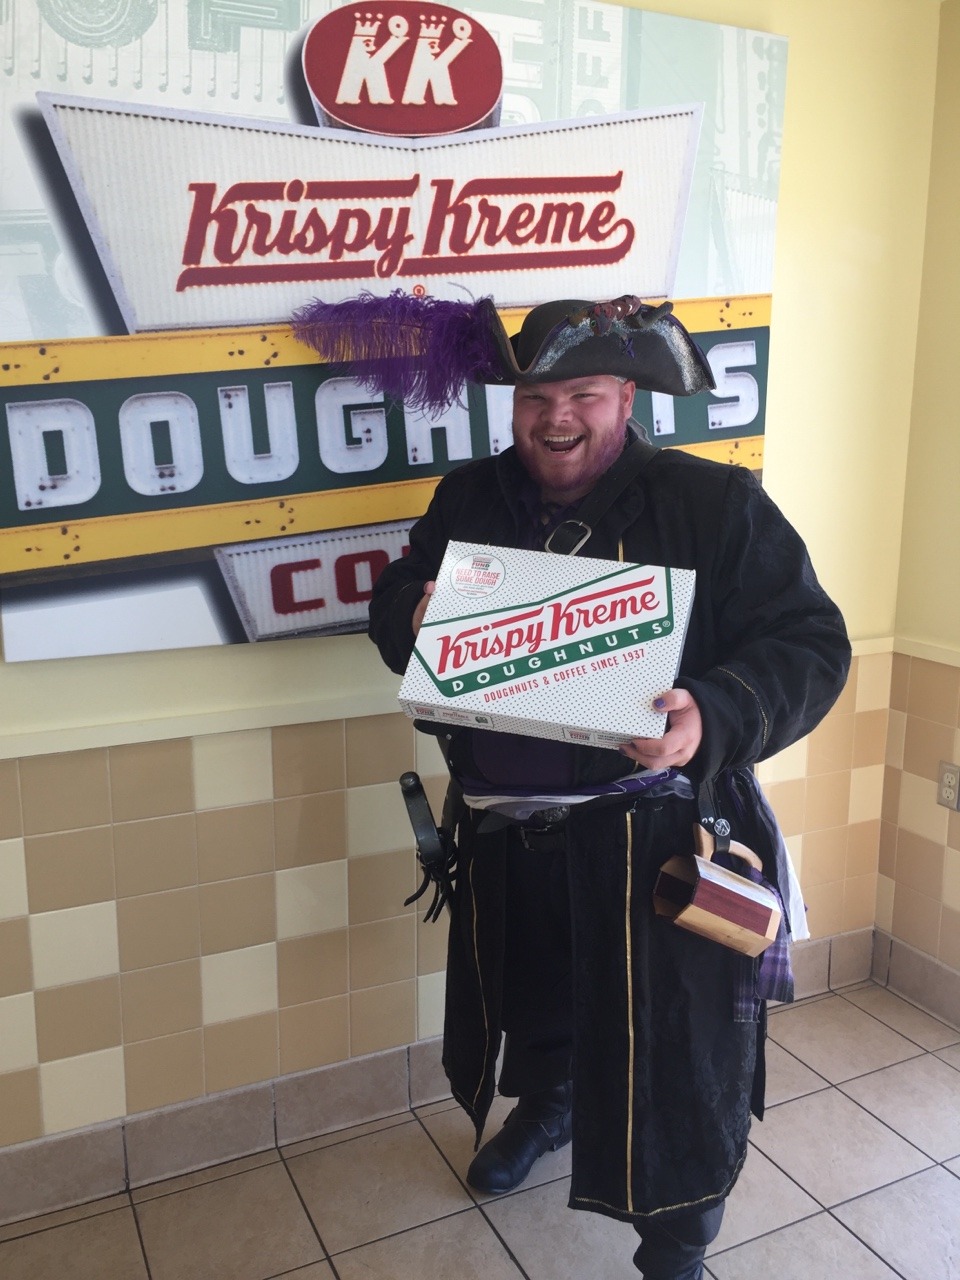 grace-and-ace:  aroaceinyourface:  Free donuts for talk like a pirate day! Went for